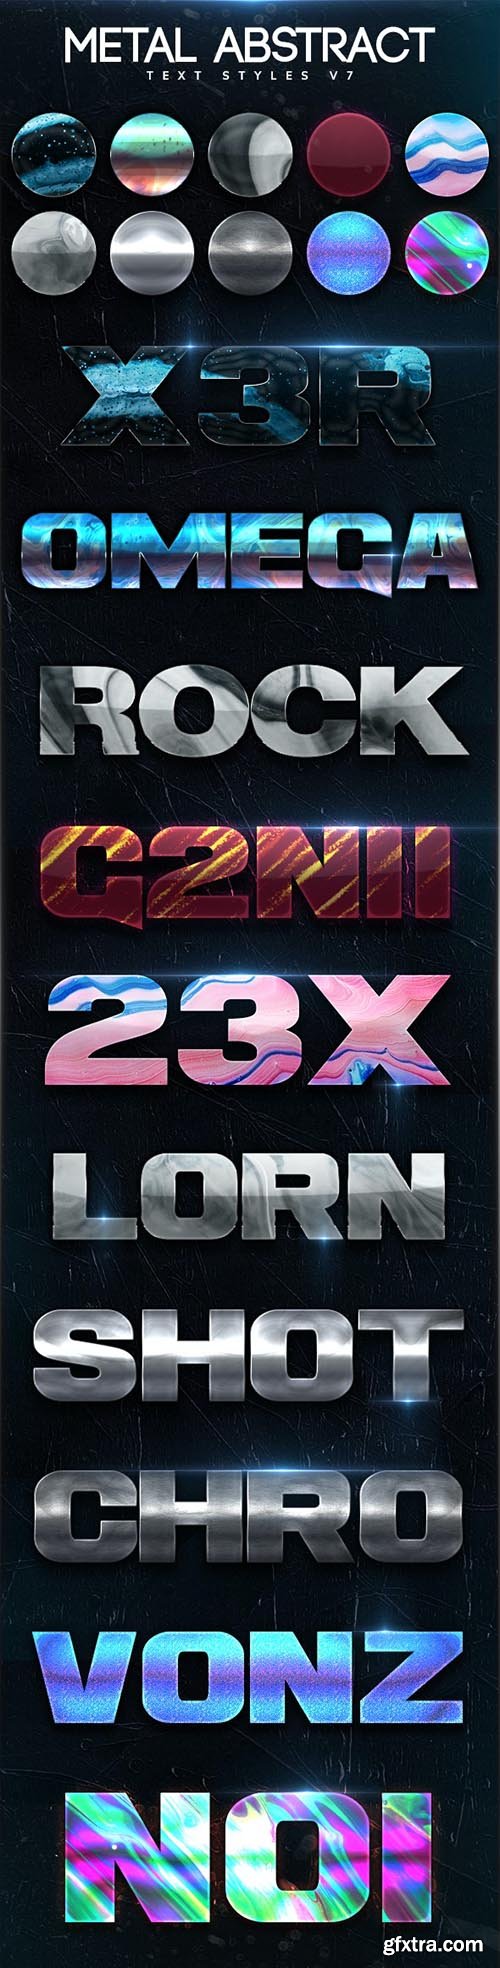 GraphicRiver - Metal Abstract Text Styles V7 26412923